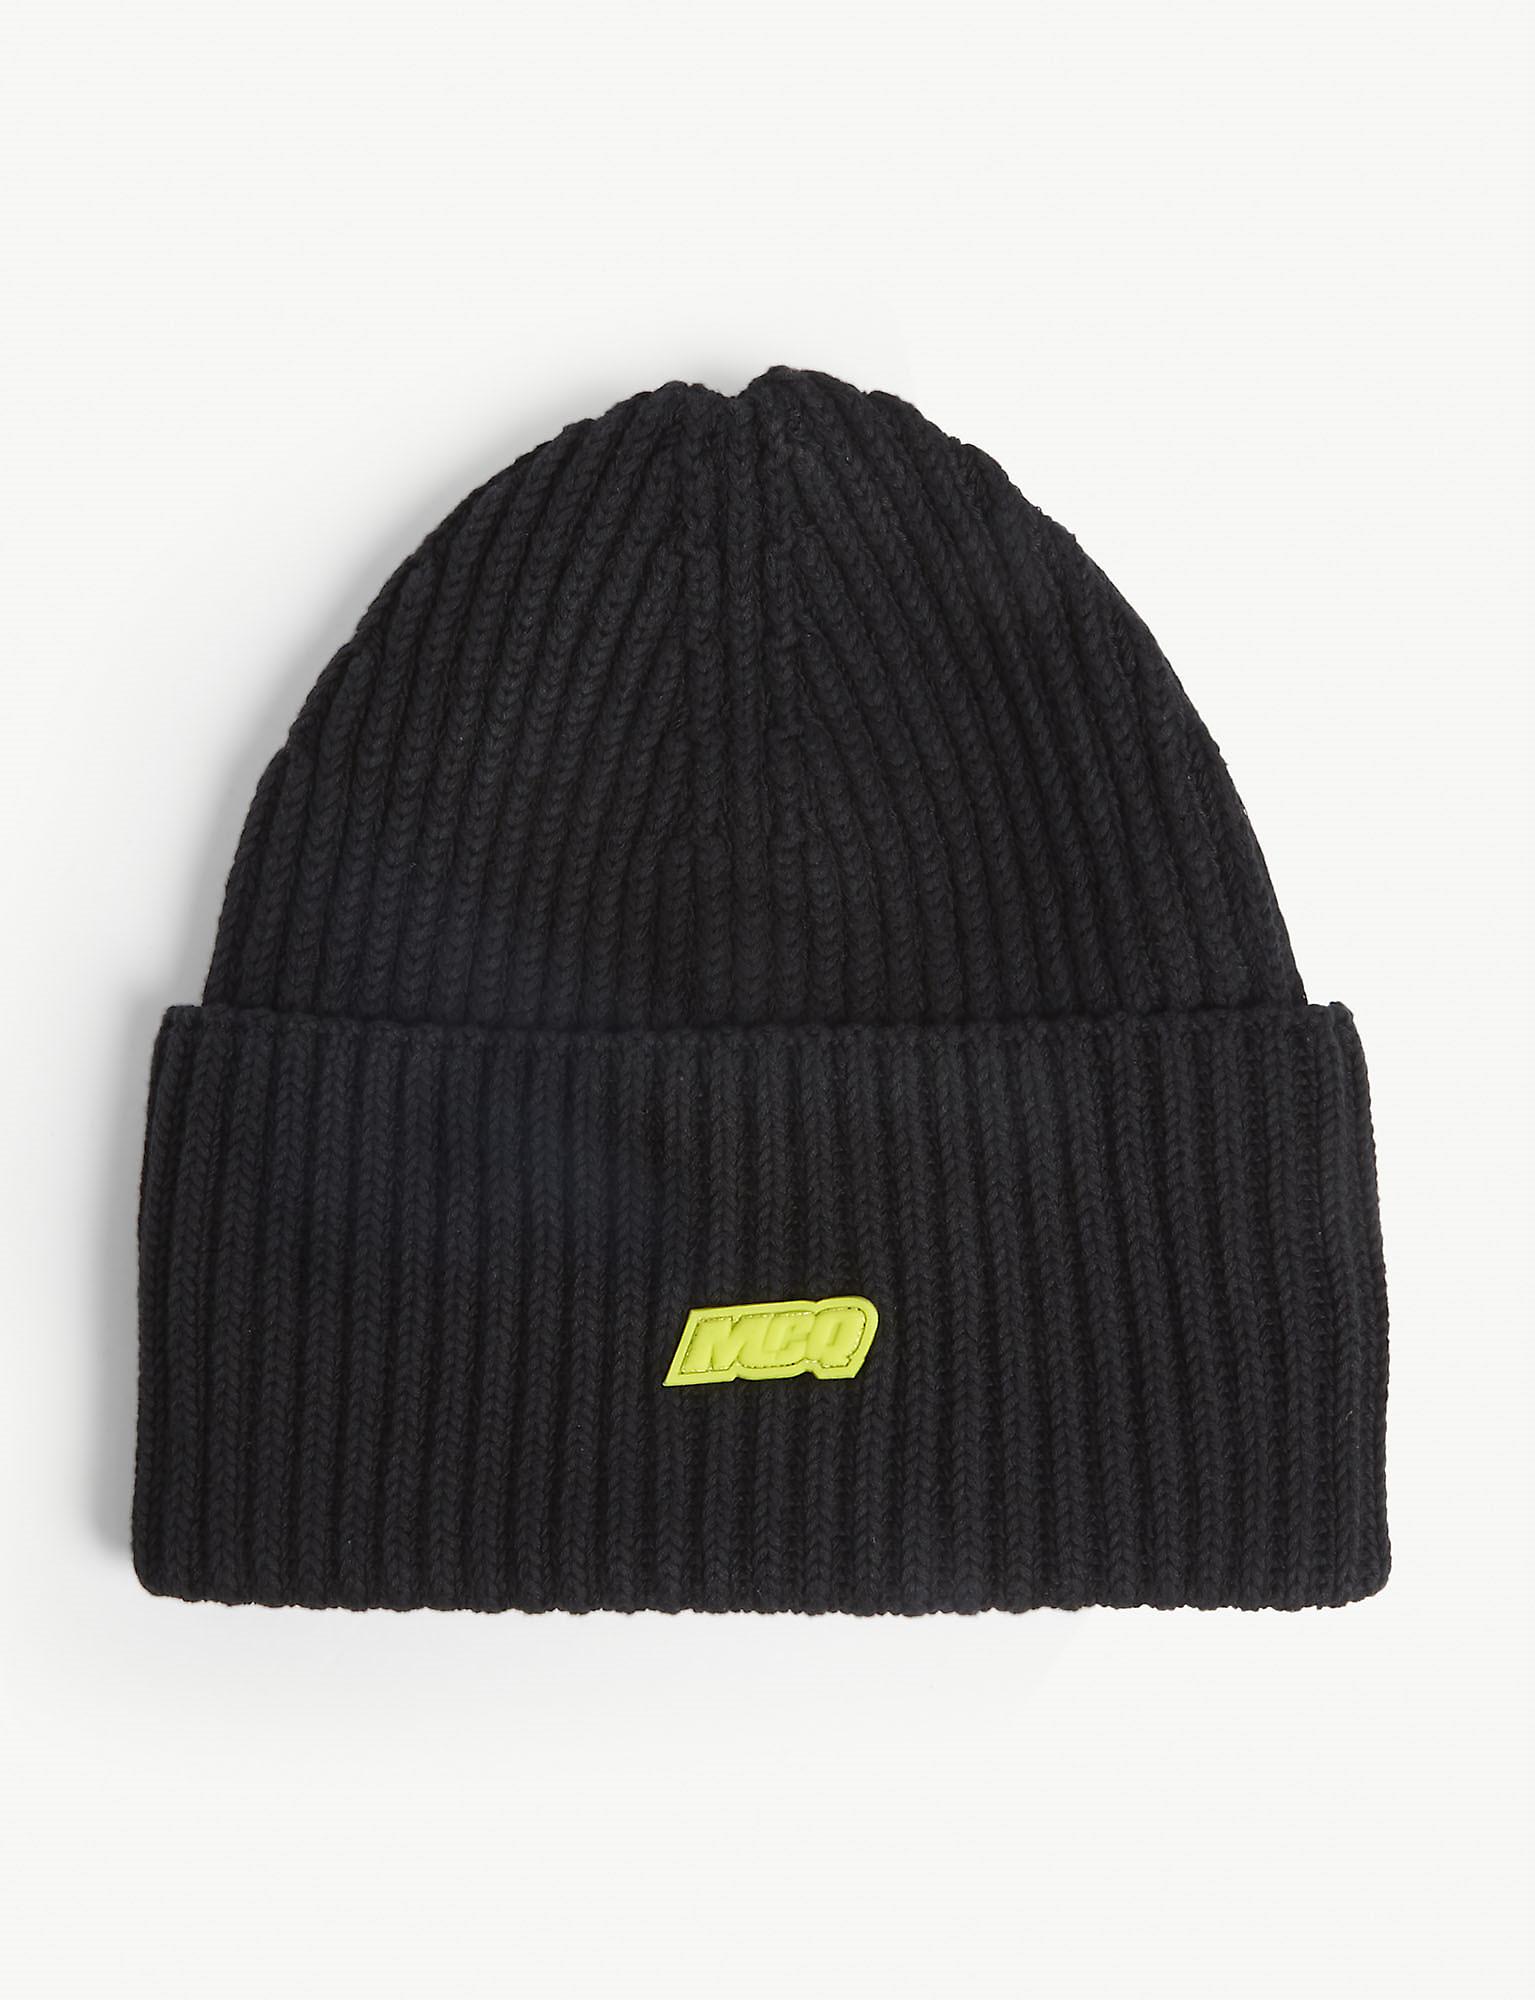 McQ Cotton Ribbed Beanie Hat in Black 